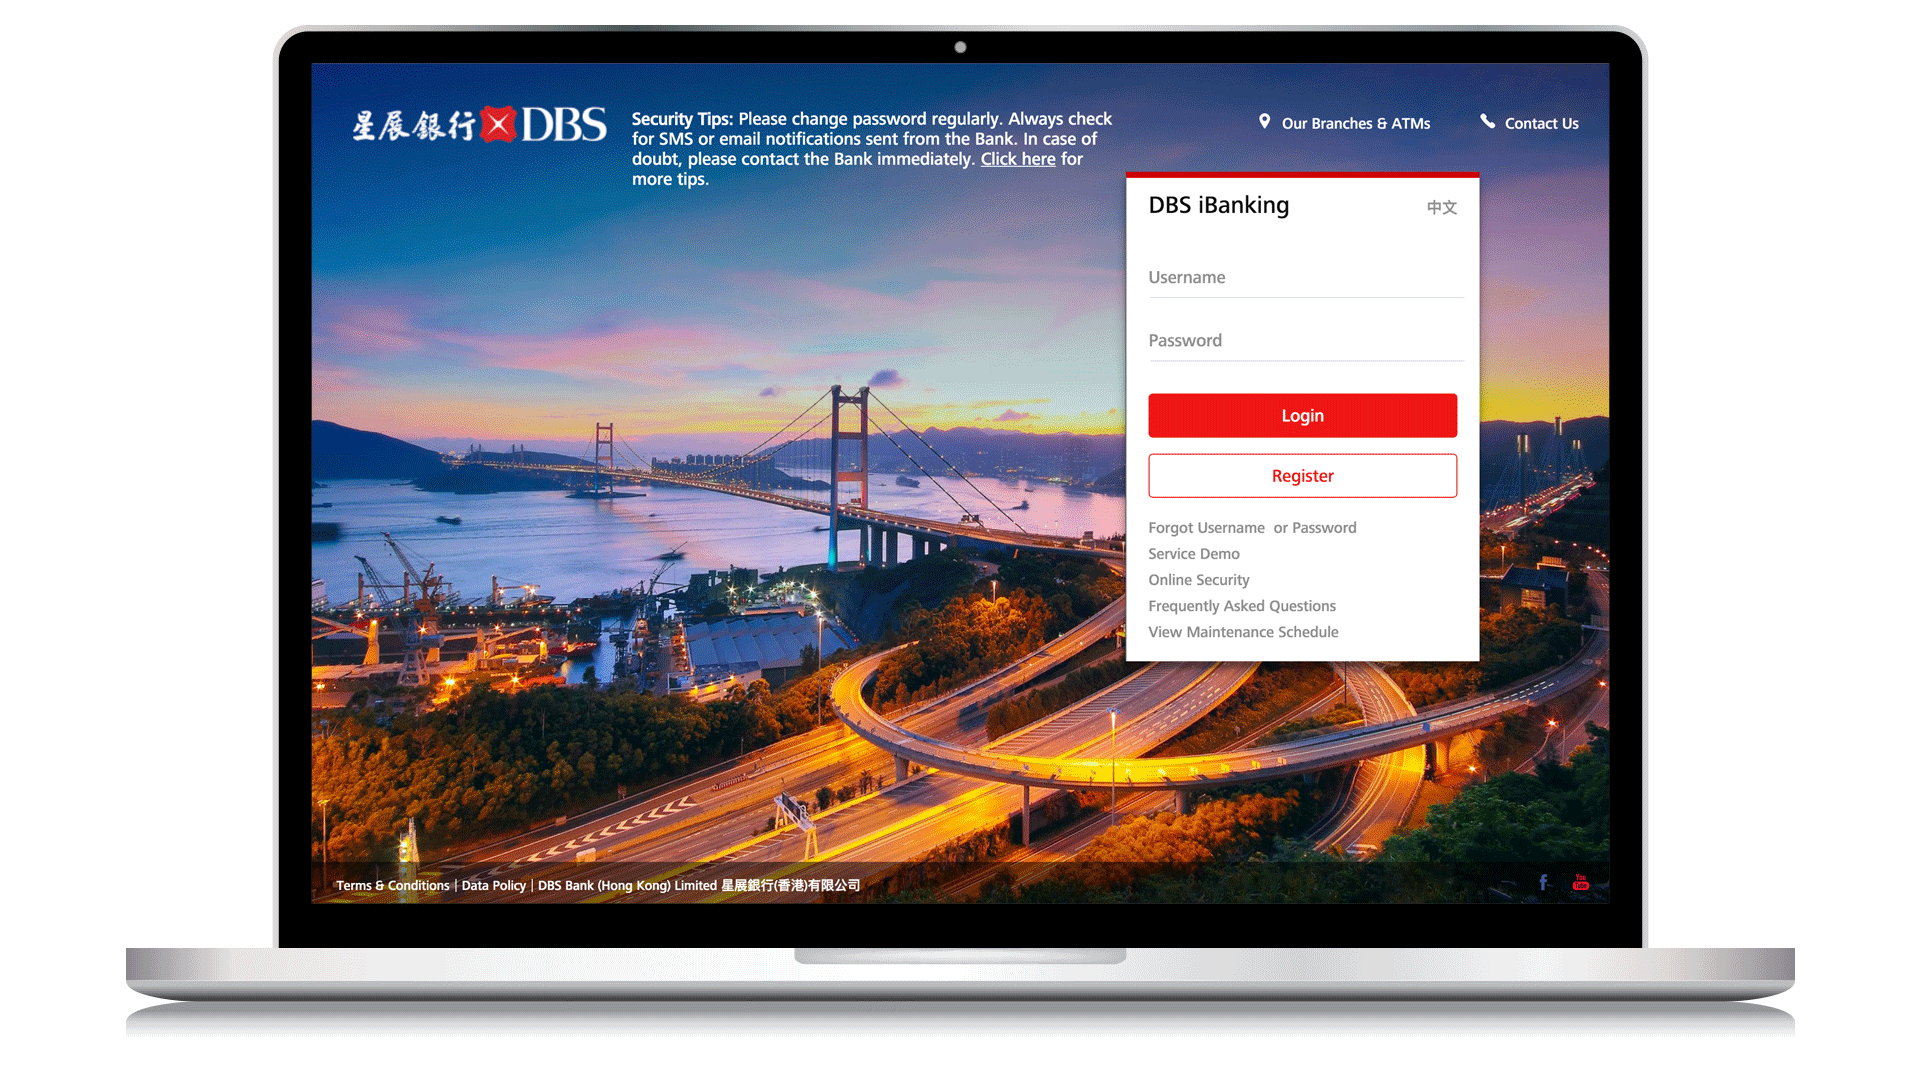 Set Daily Limit for PayFast via DBS iBanking